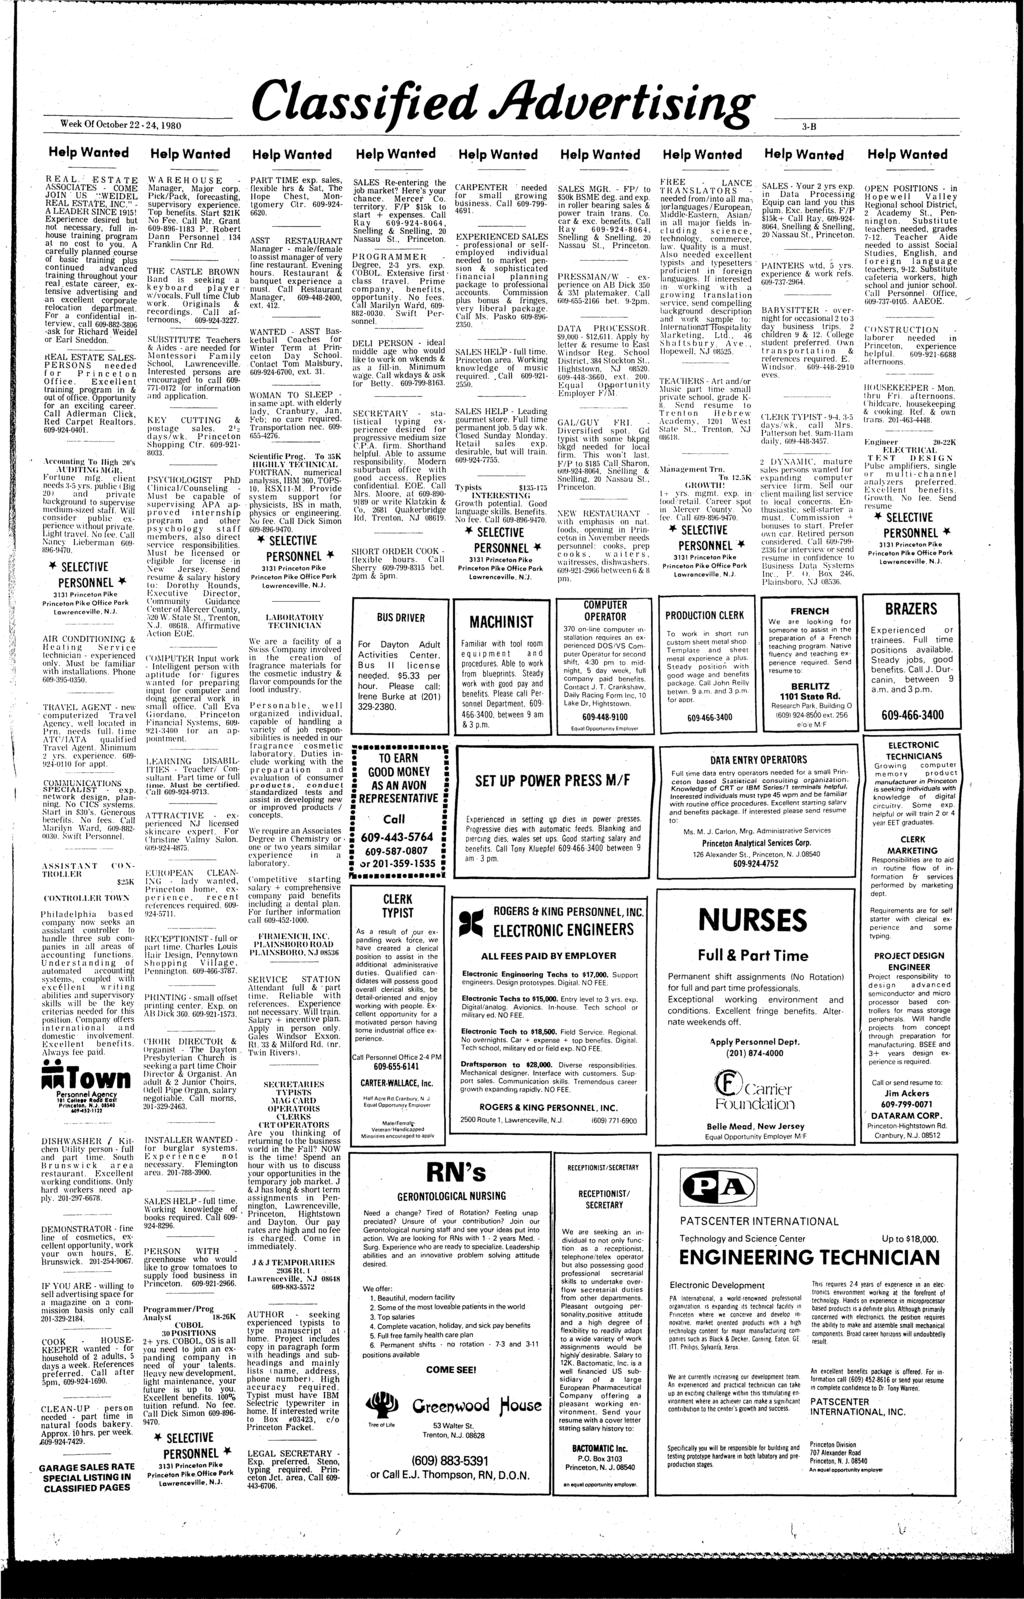 Classified Advertising Week Of October 22-24,1980. J ^^T 3-B Help Wanted Help Wanted Help Wanted Help Wanted Help Wanted Help Wanted Help Wanted Help Wanted Help Wanted I i i i REAL.